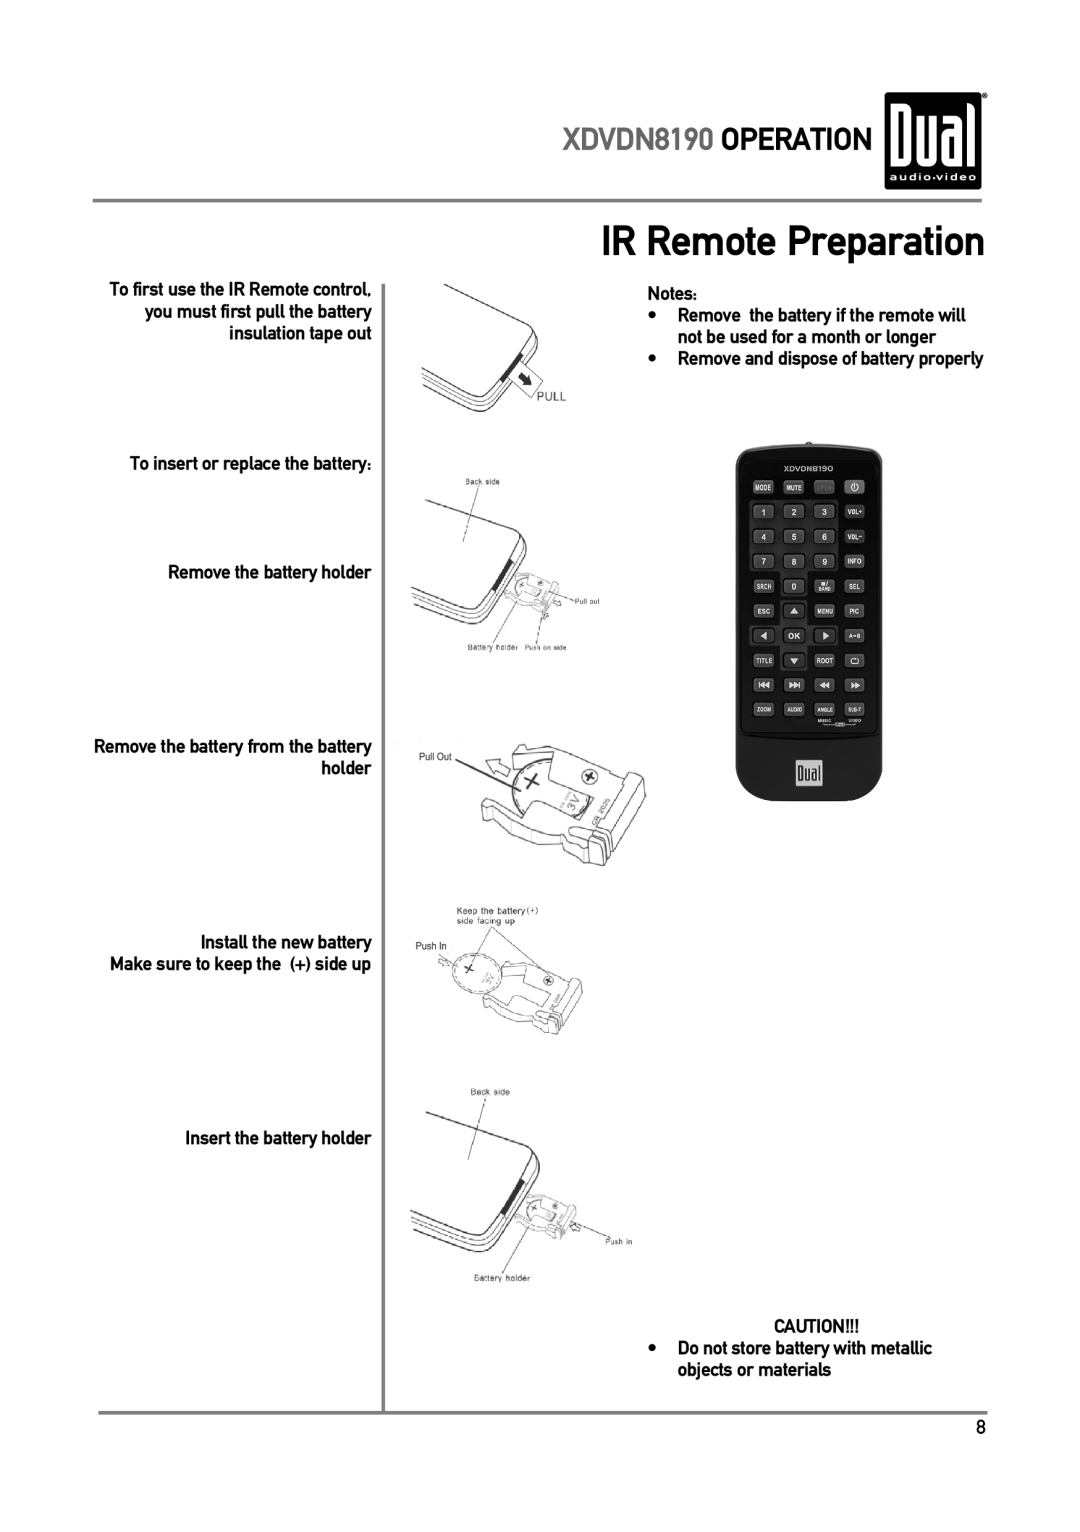 Dual IR Remote Preparation, XDVDN8190 OPERATION, To insert or replace the battery, Remove the battery holder, Notes 